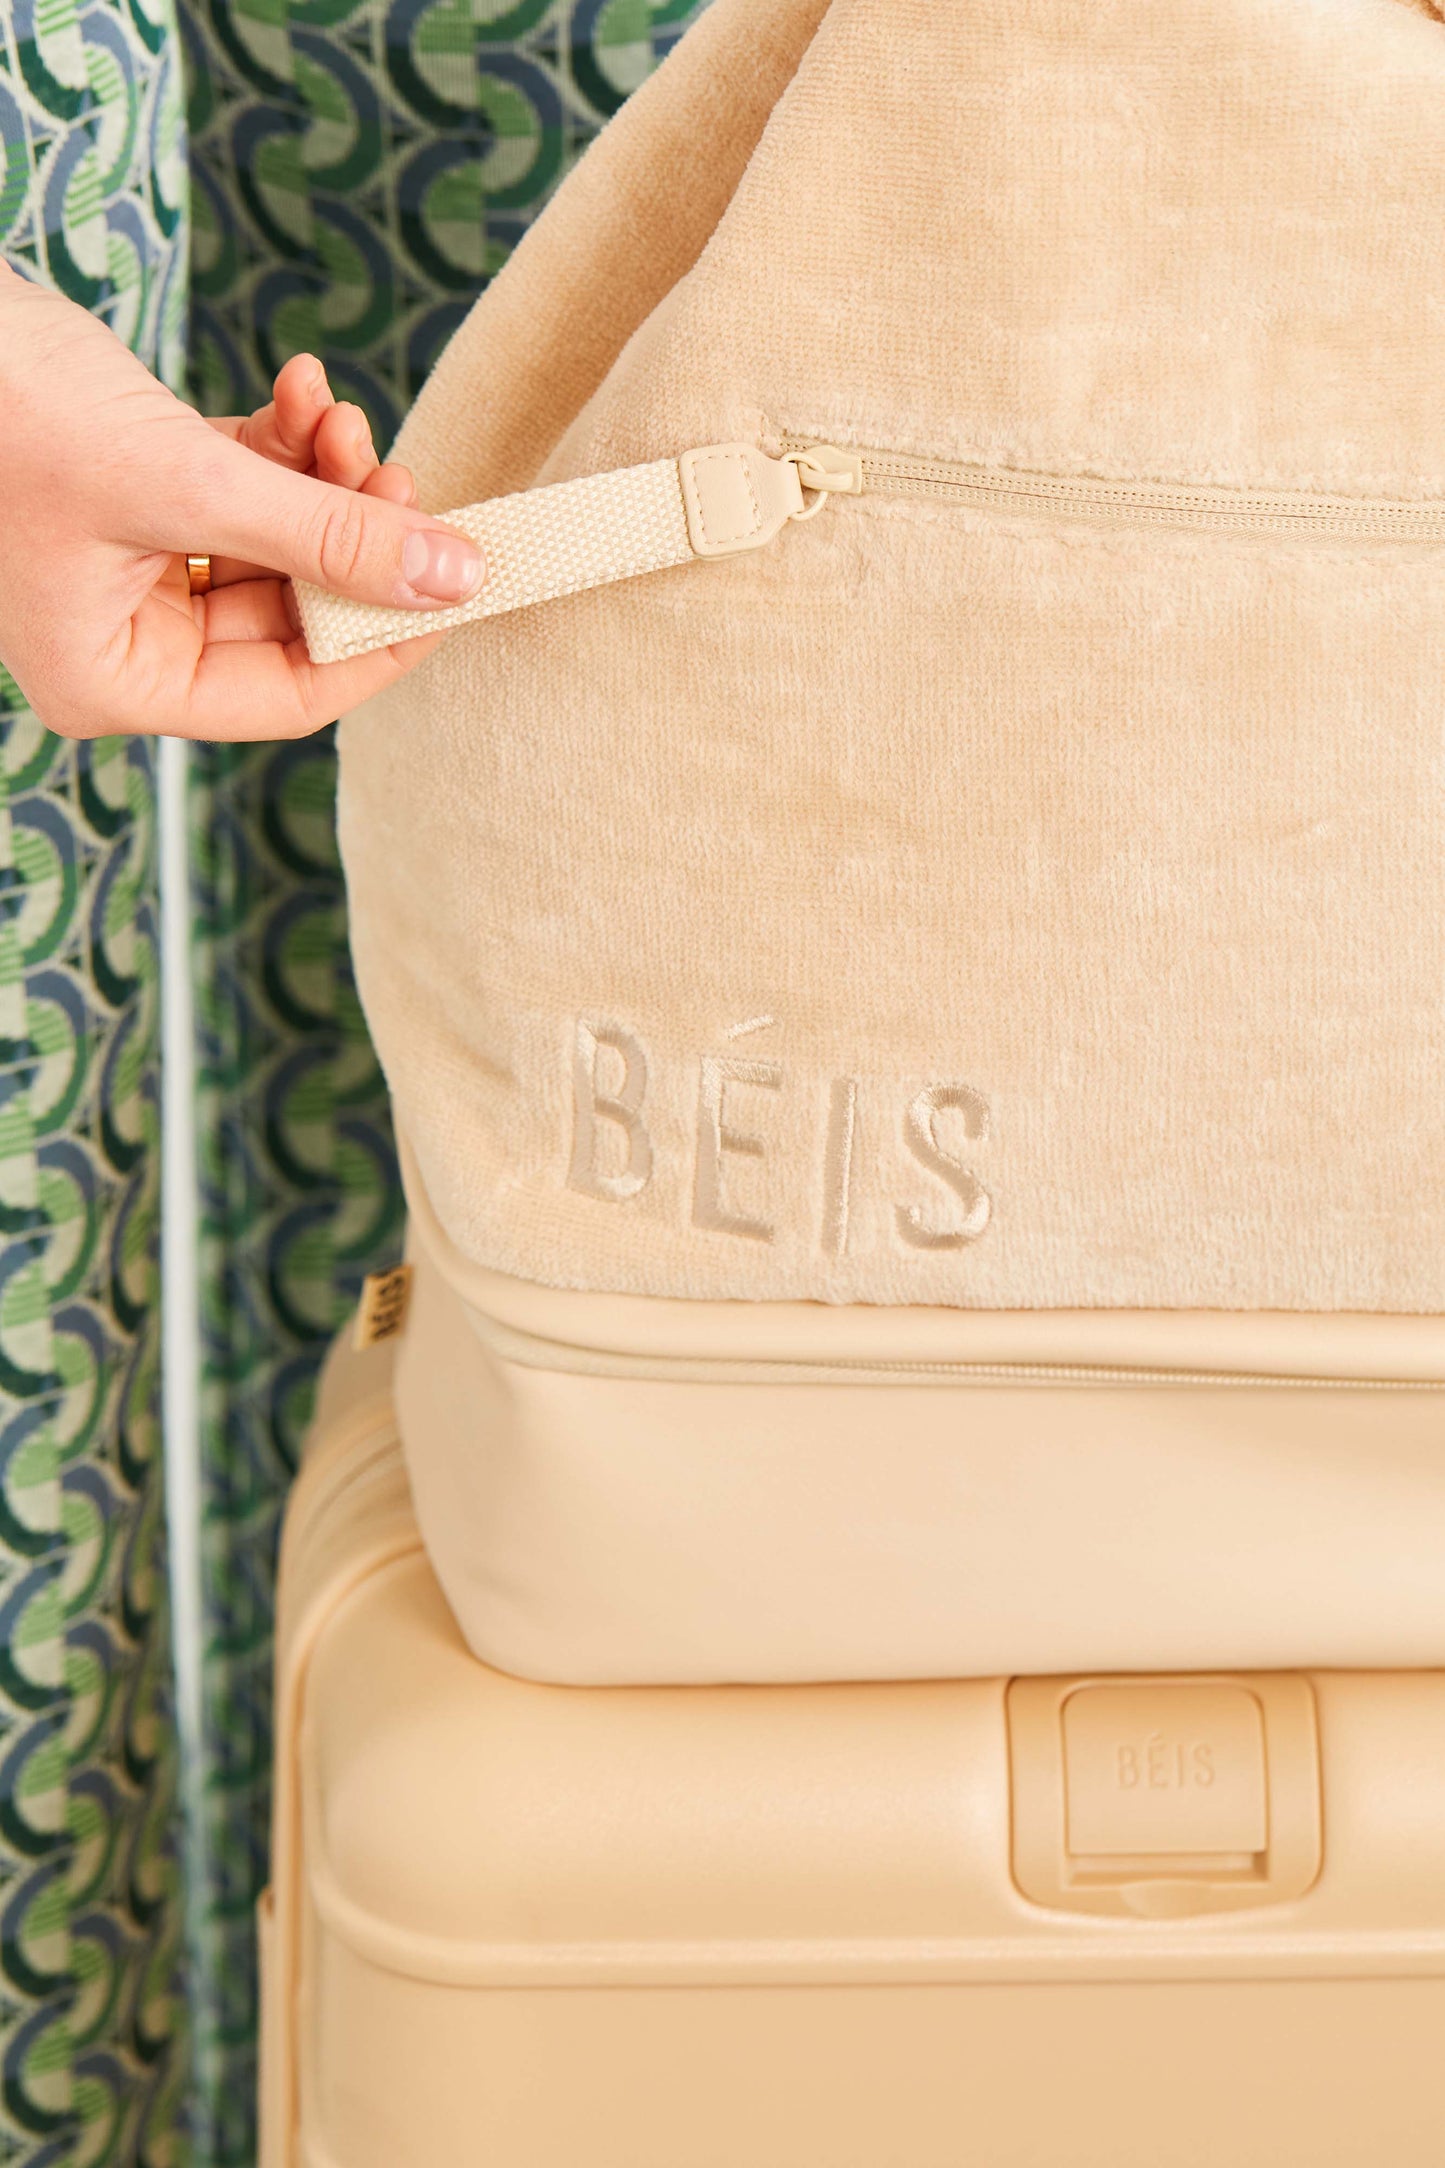 The Terry Backpack Cooler in Beige